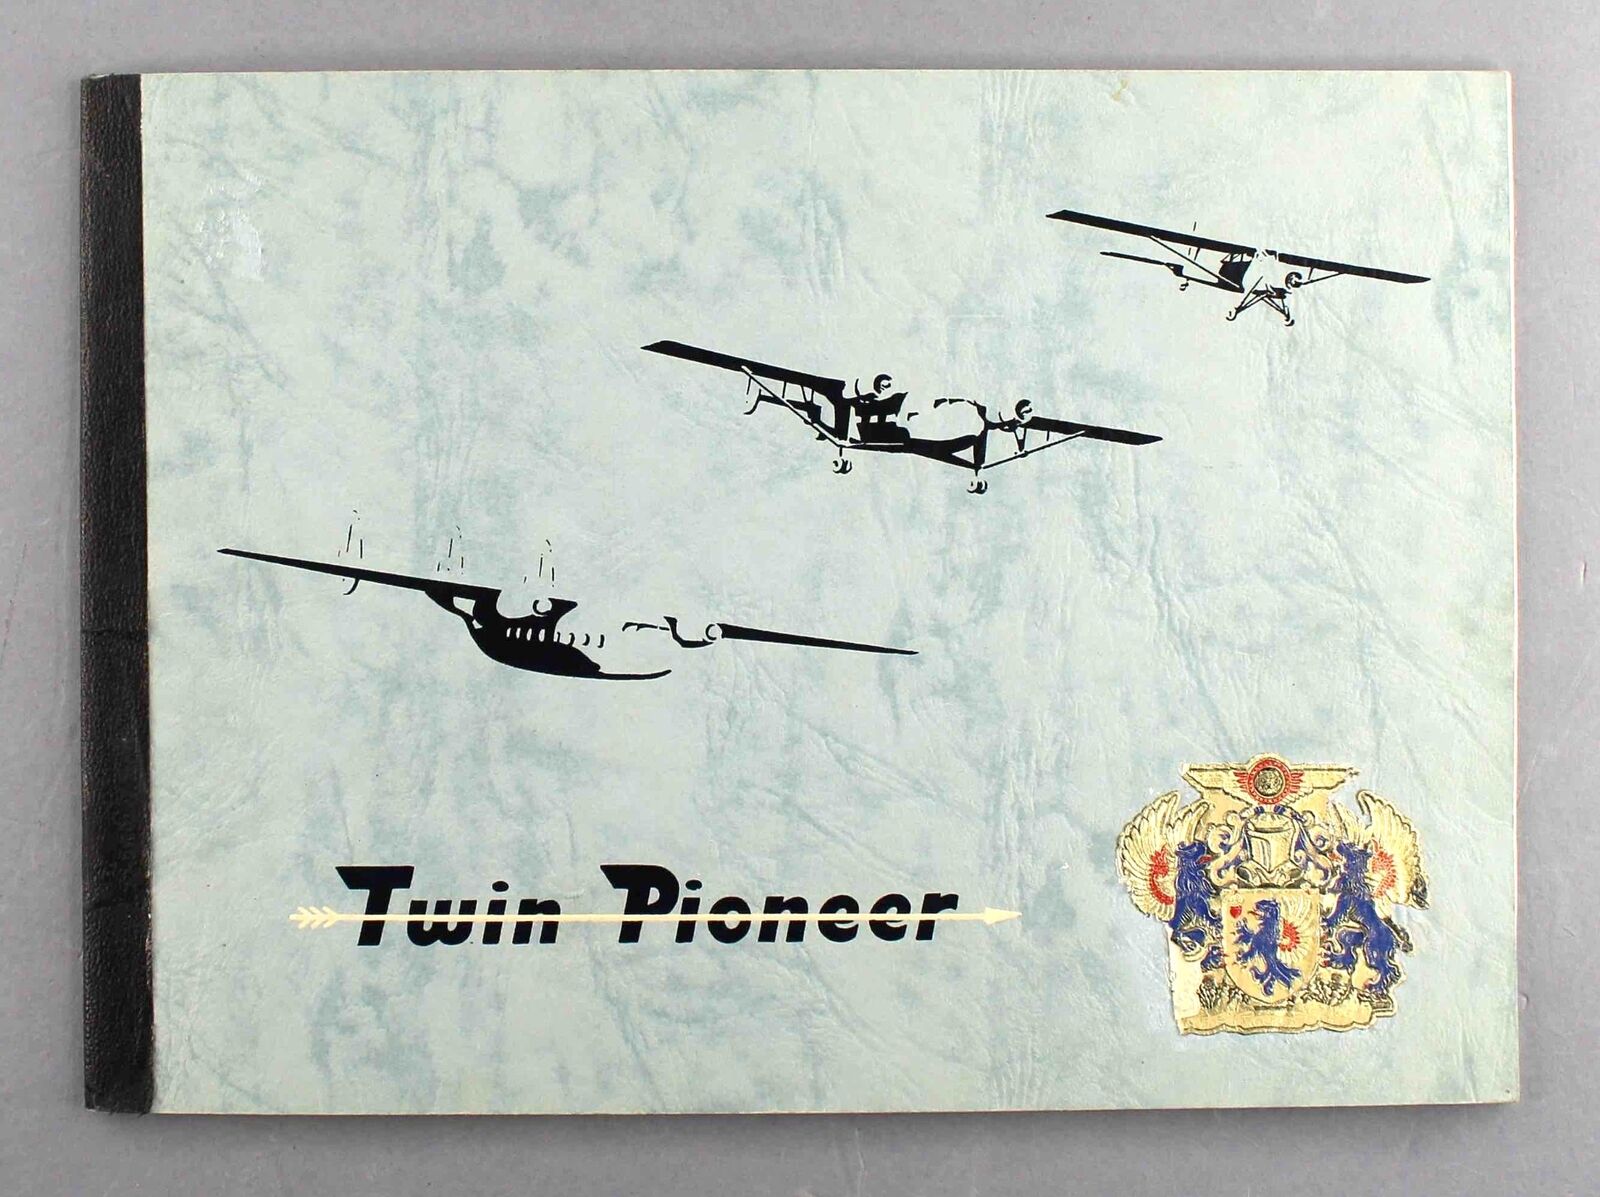 SCOTTISH AVIATION TWIN PIONEER AIRCRAFT MANUFACTURES SALES BROCHURE 1956